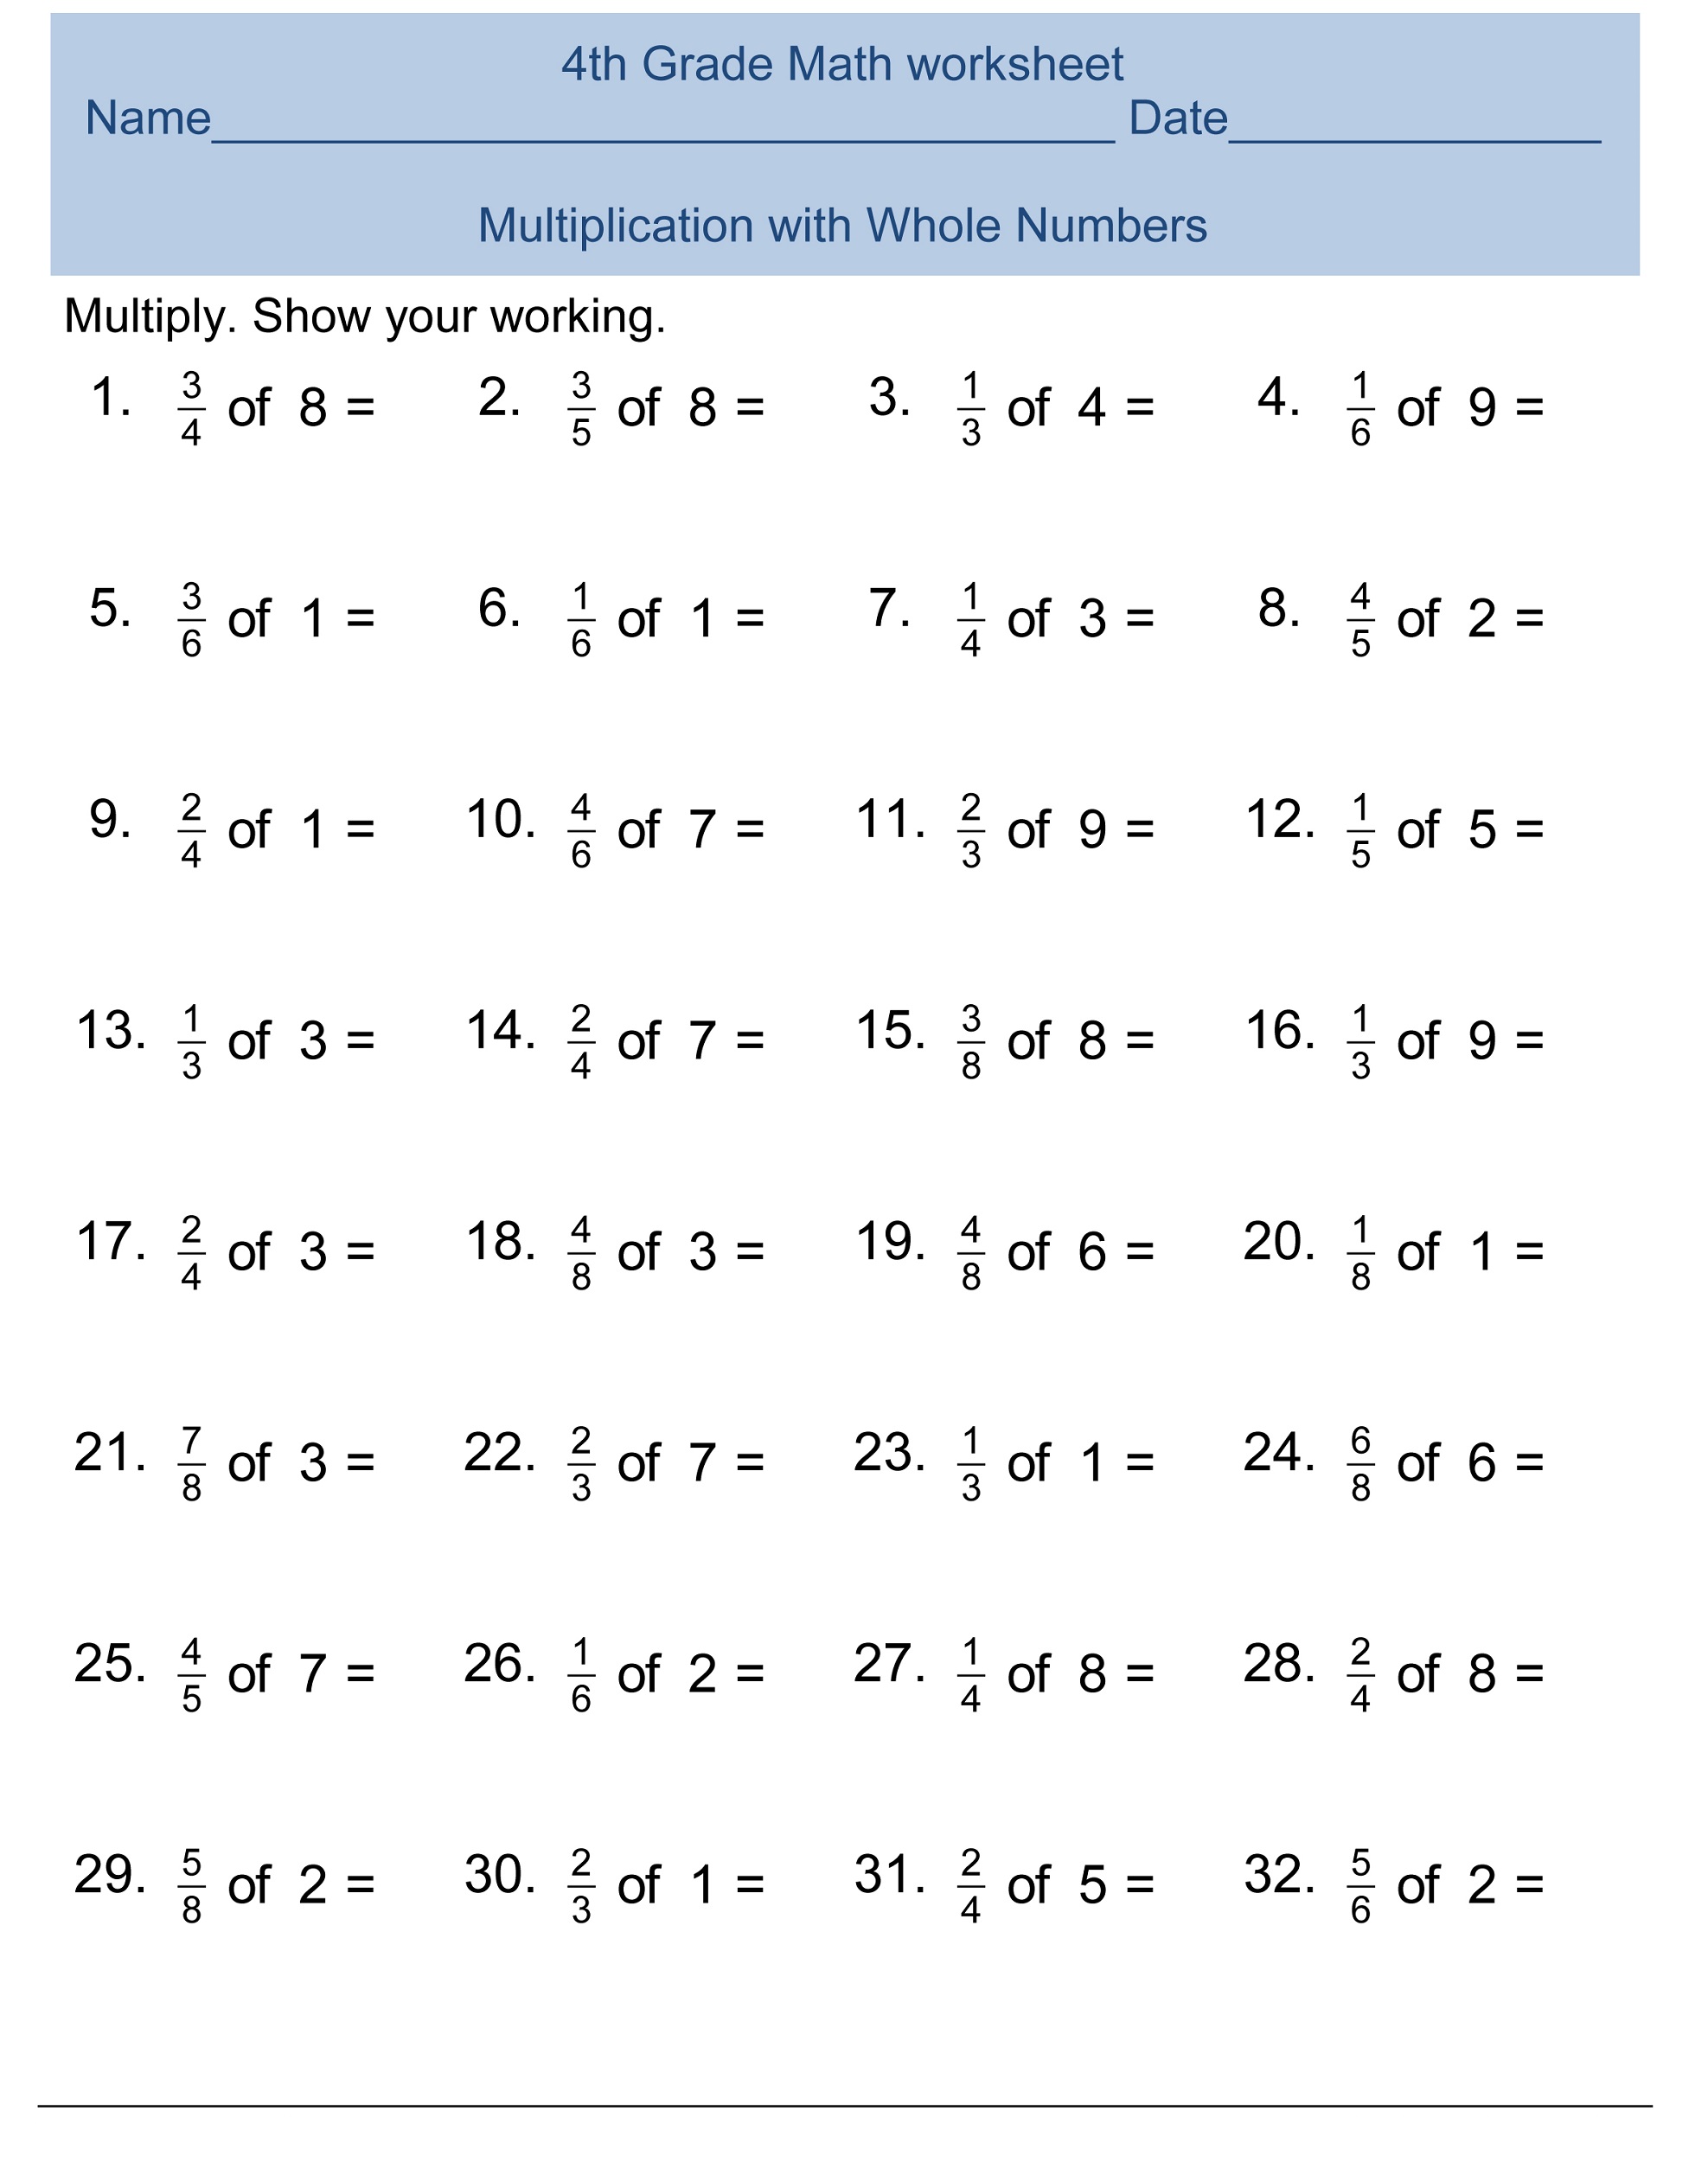 4th-grade-multiplication-worksheets-best-coloring-pages-for-kids-math-papers-to-print